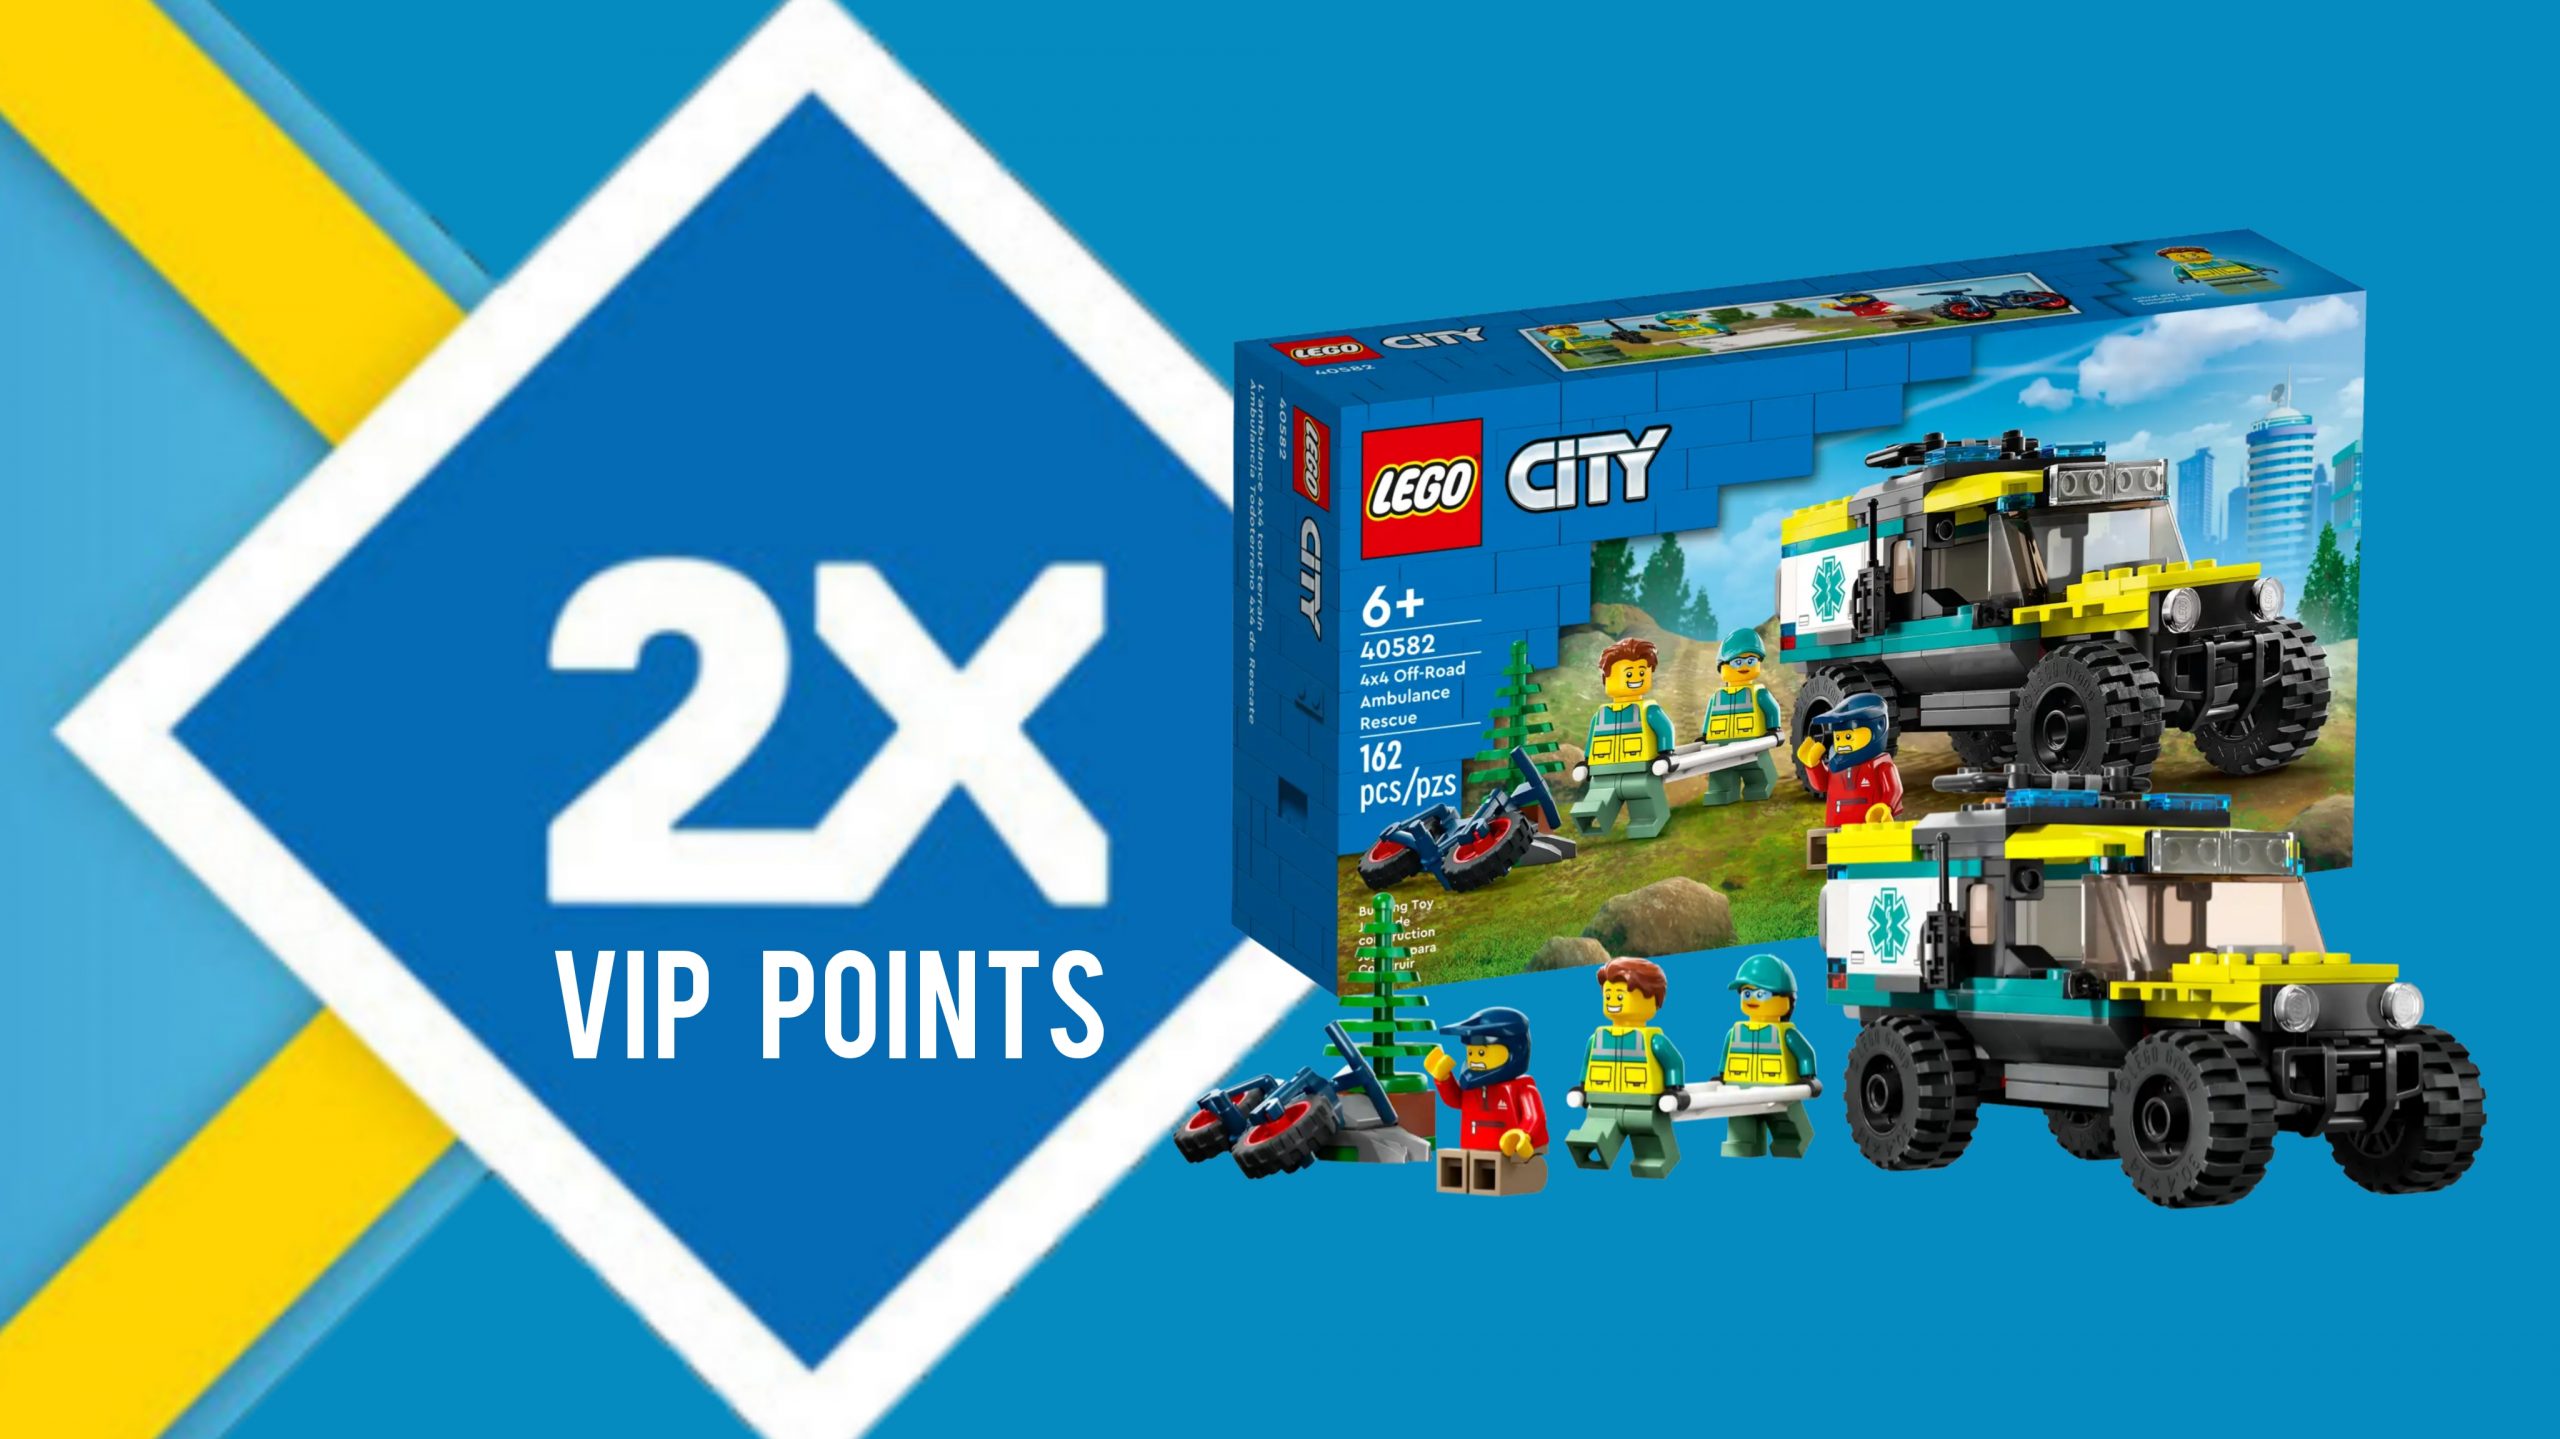 LEGO Double VIP Points Event And LEGO City 4×4 OffRoad Ambulance